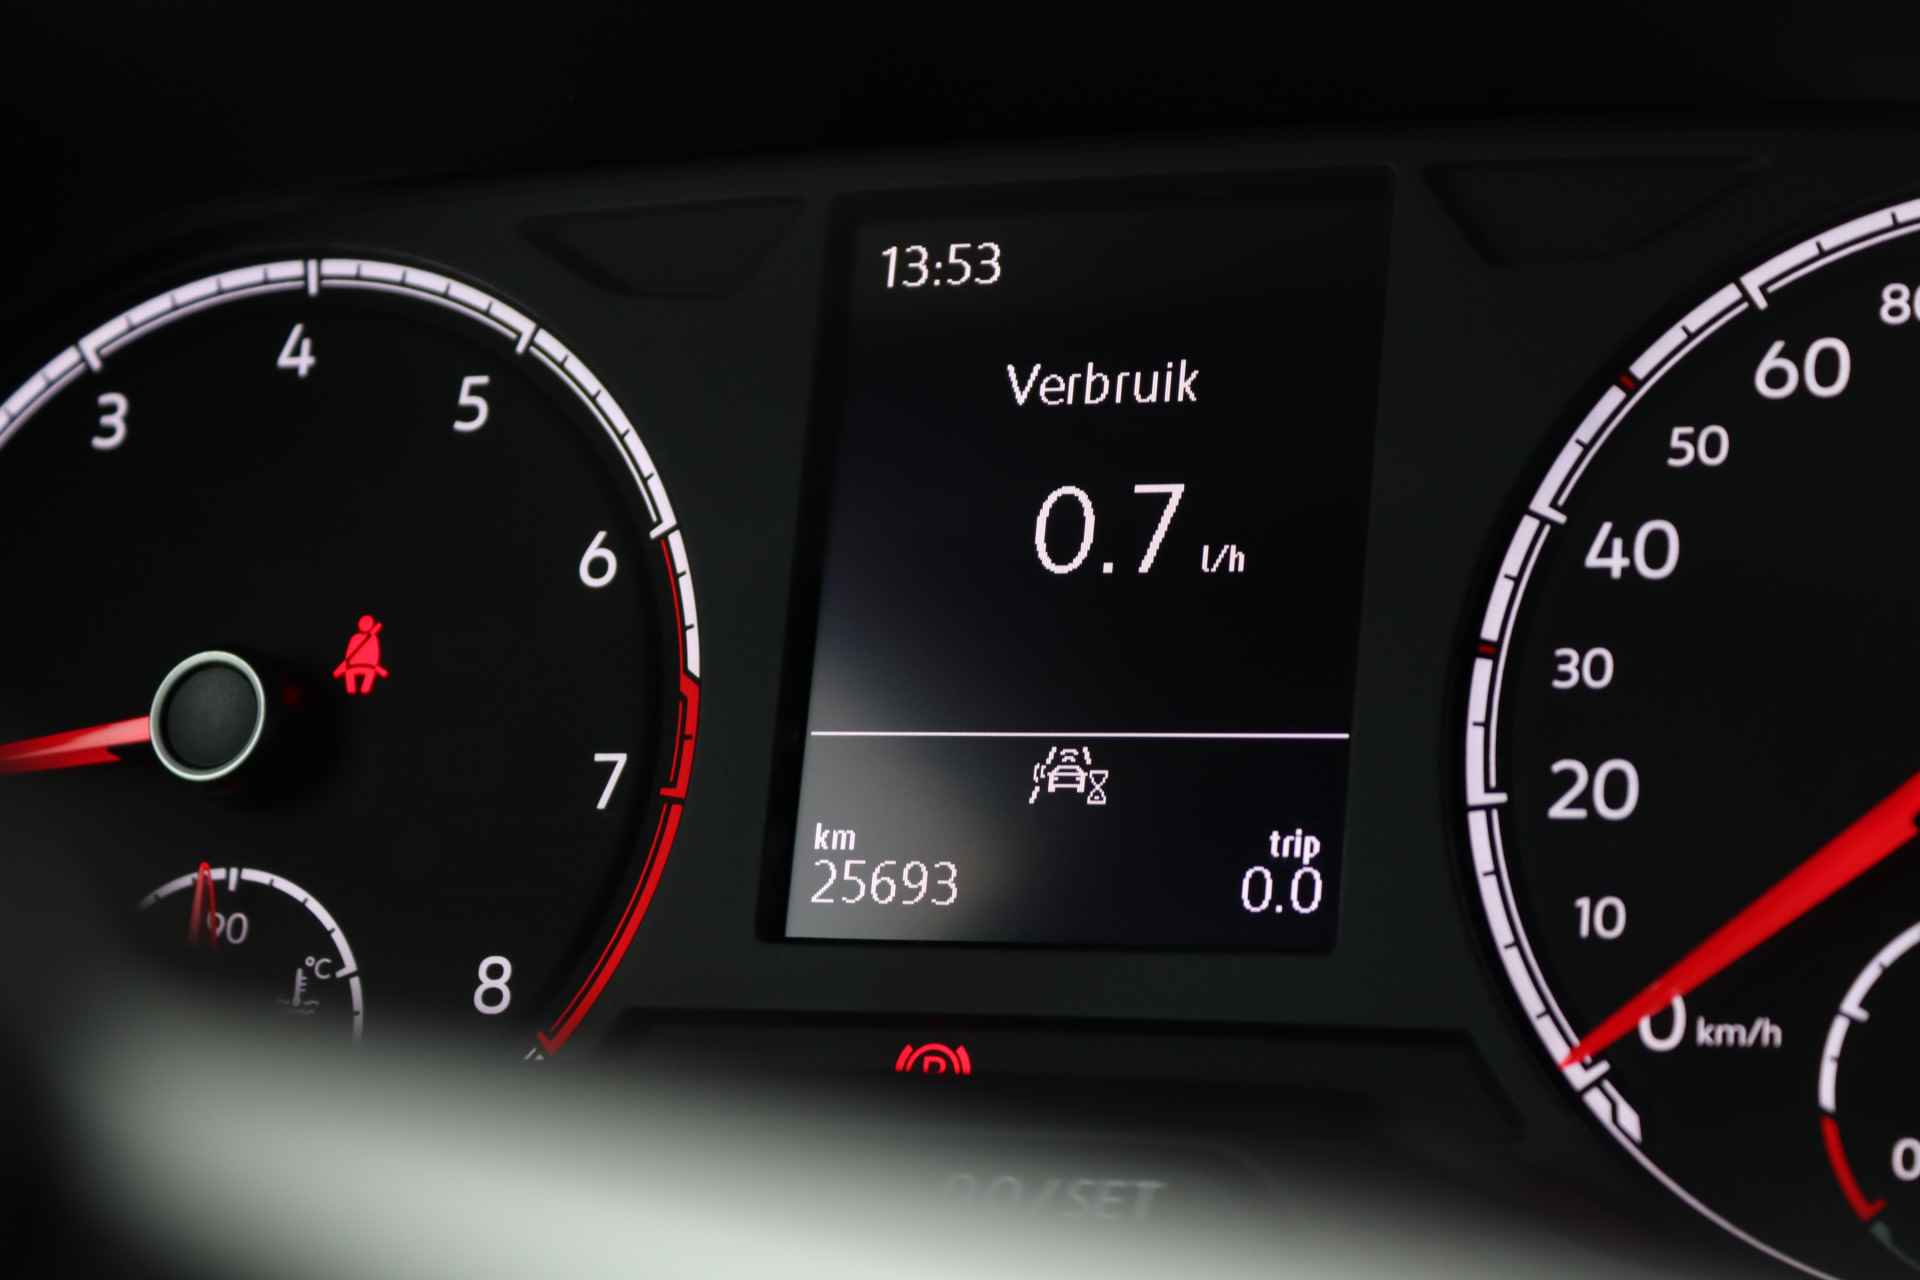 Volkswagen T-Cross 1.0 TSI 95 pk Life | App-connect  | PDC voor & achter | 16" LM | Adaptive Cruise - 20/38